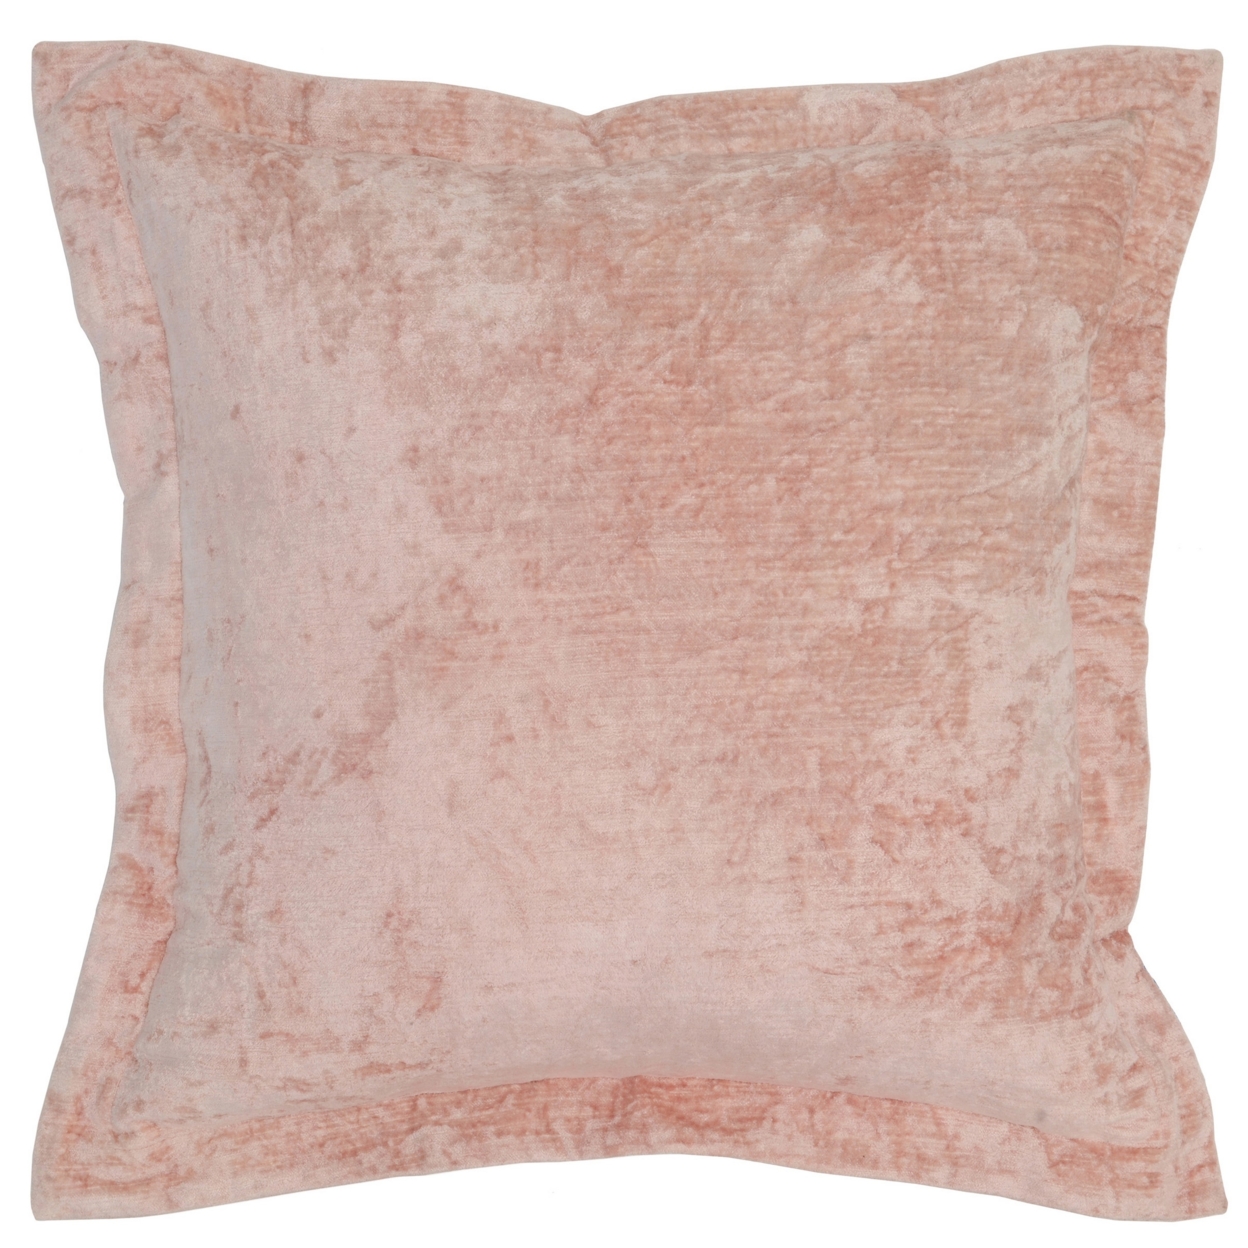 Square Fabric Throw Pillow With Solid Color And Flanged Edges, Pink- Saltoro Sherpi